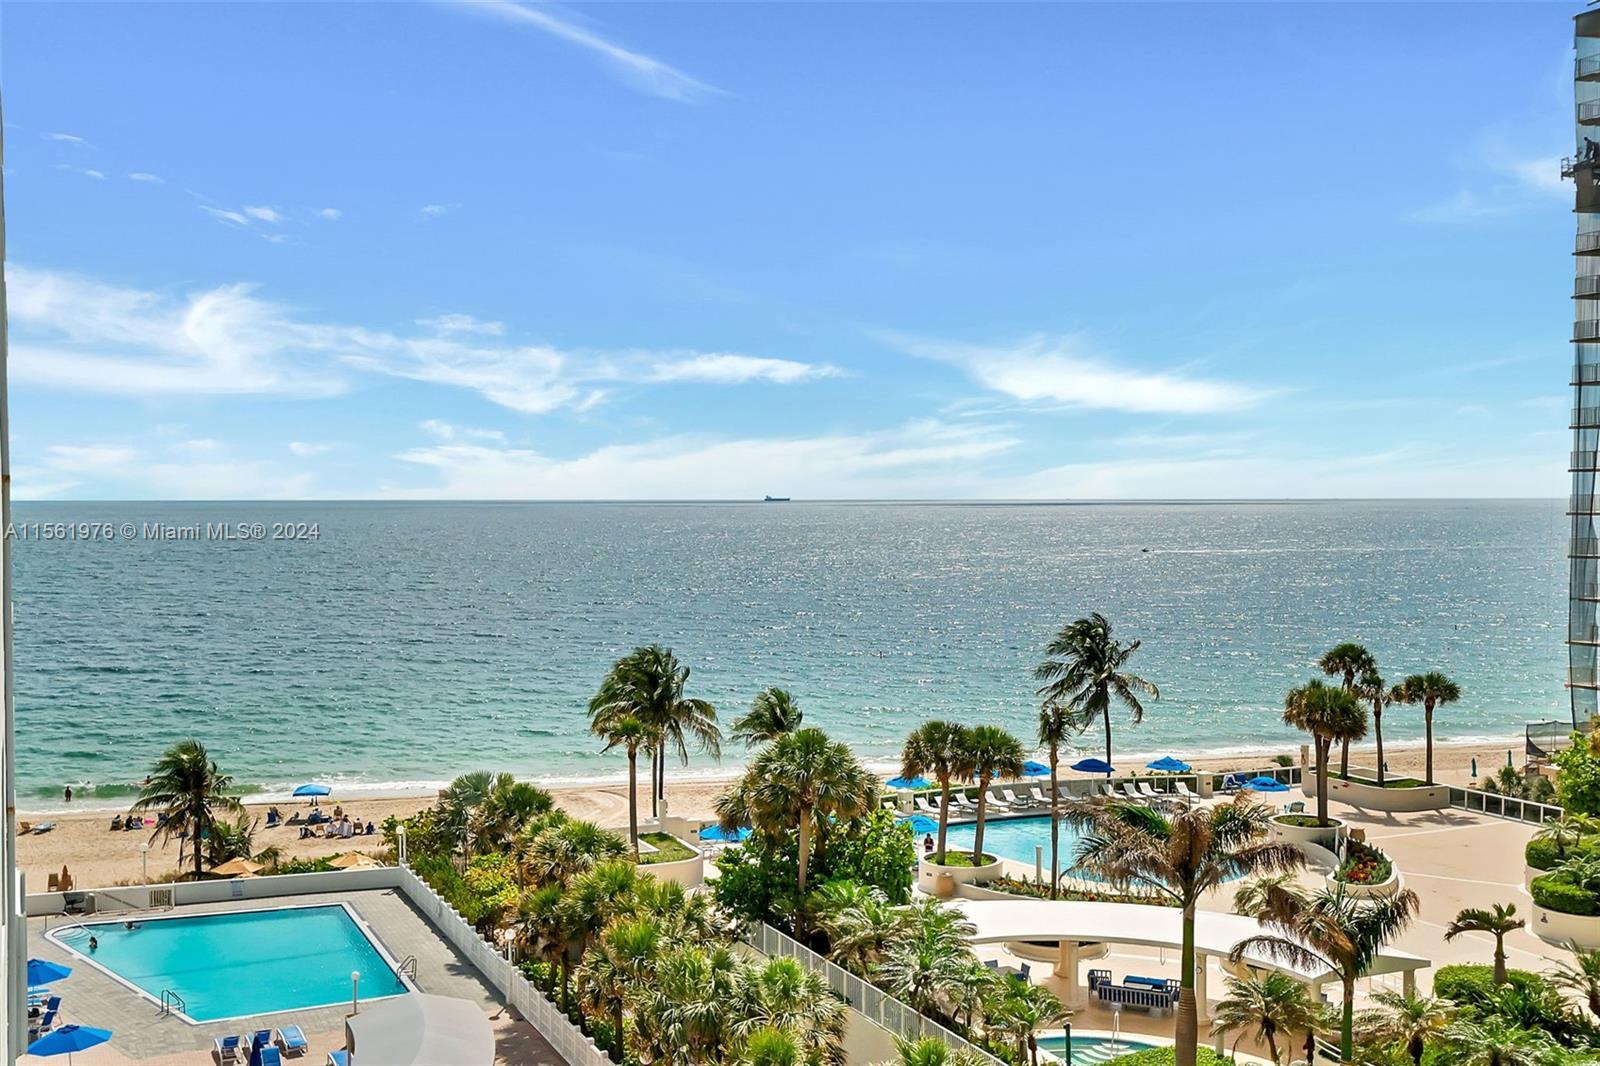 Impeccably appointed one bedroom condo on the Ocean! Enjoy ocean and city views from the open balcon